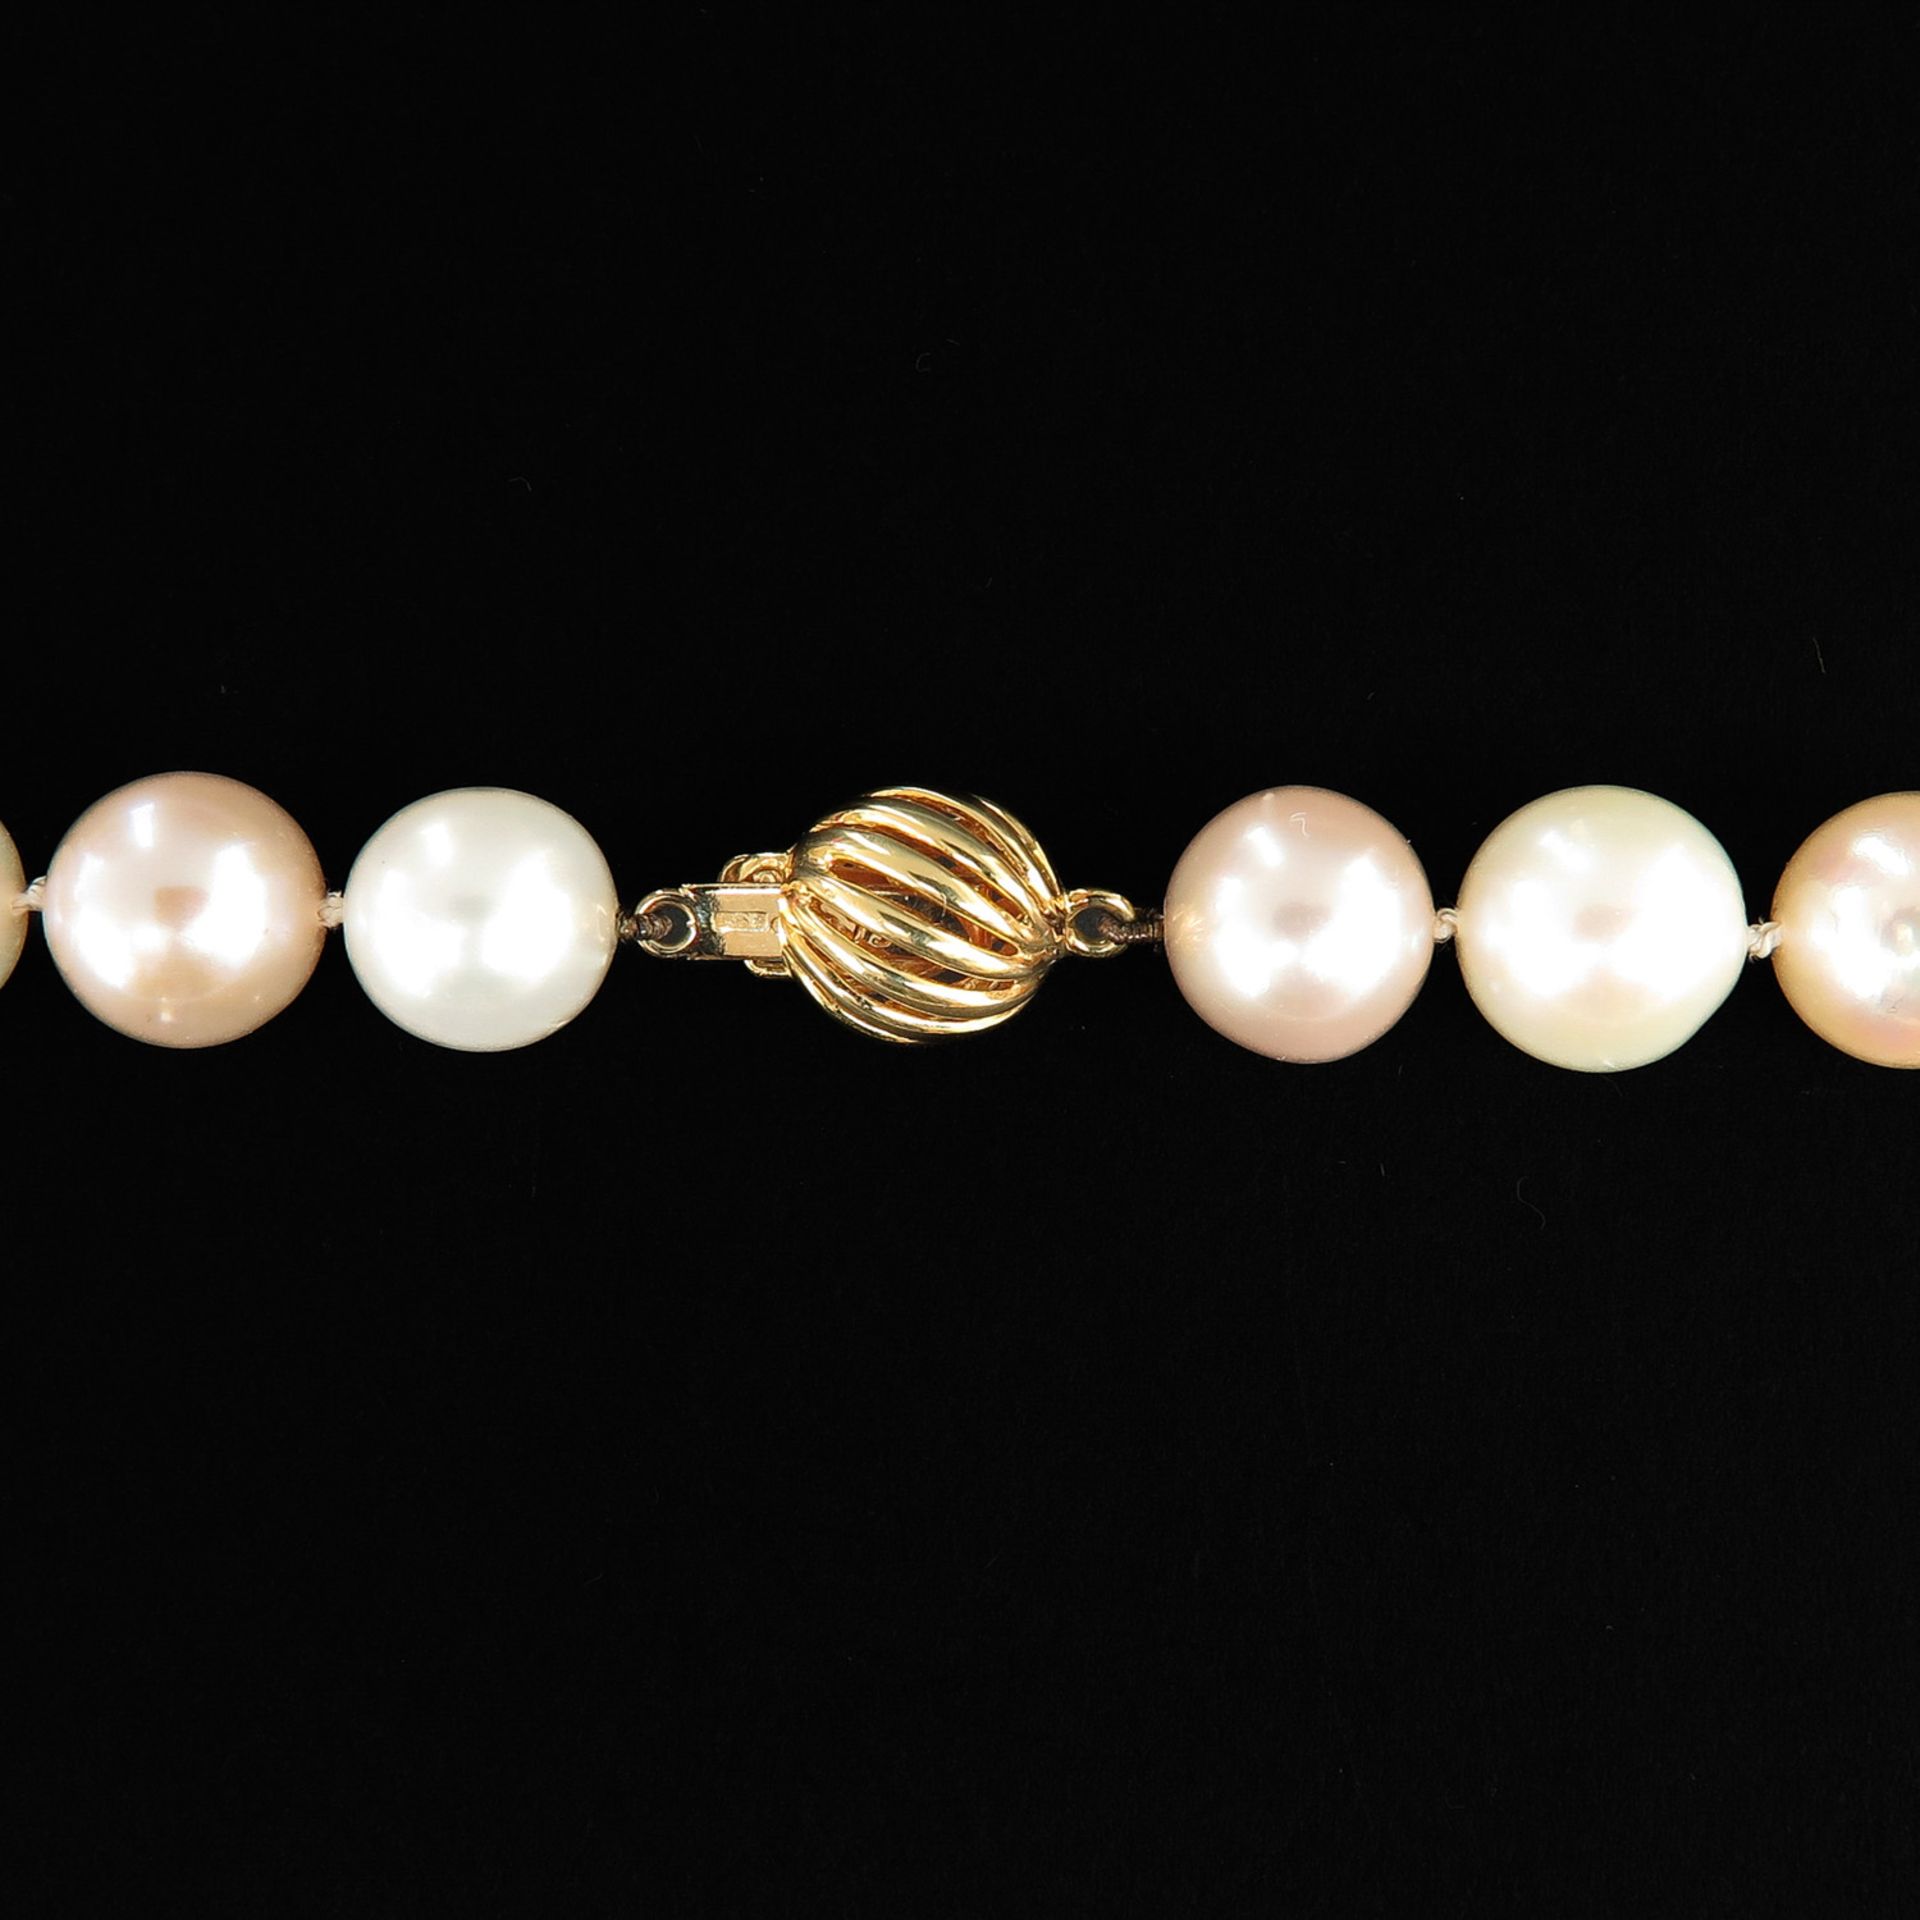 A Single Strand Pearl Necklace - Image 4 of 6